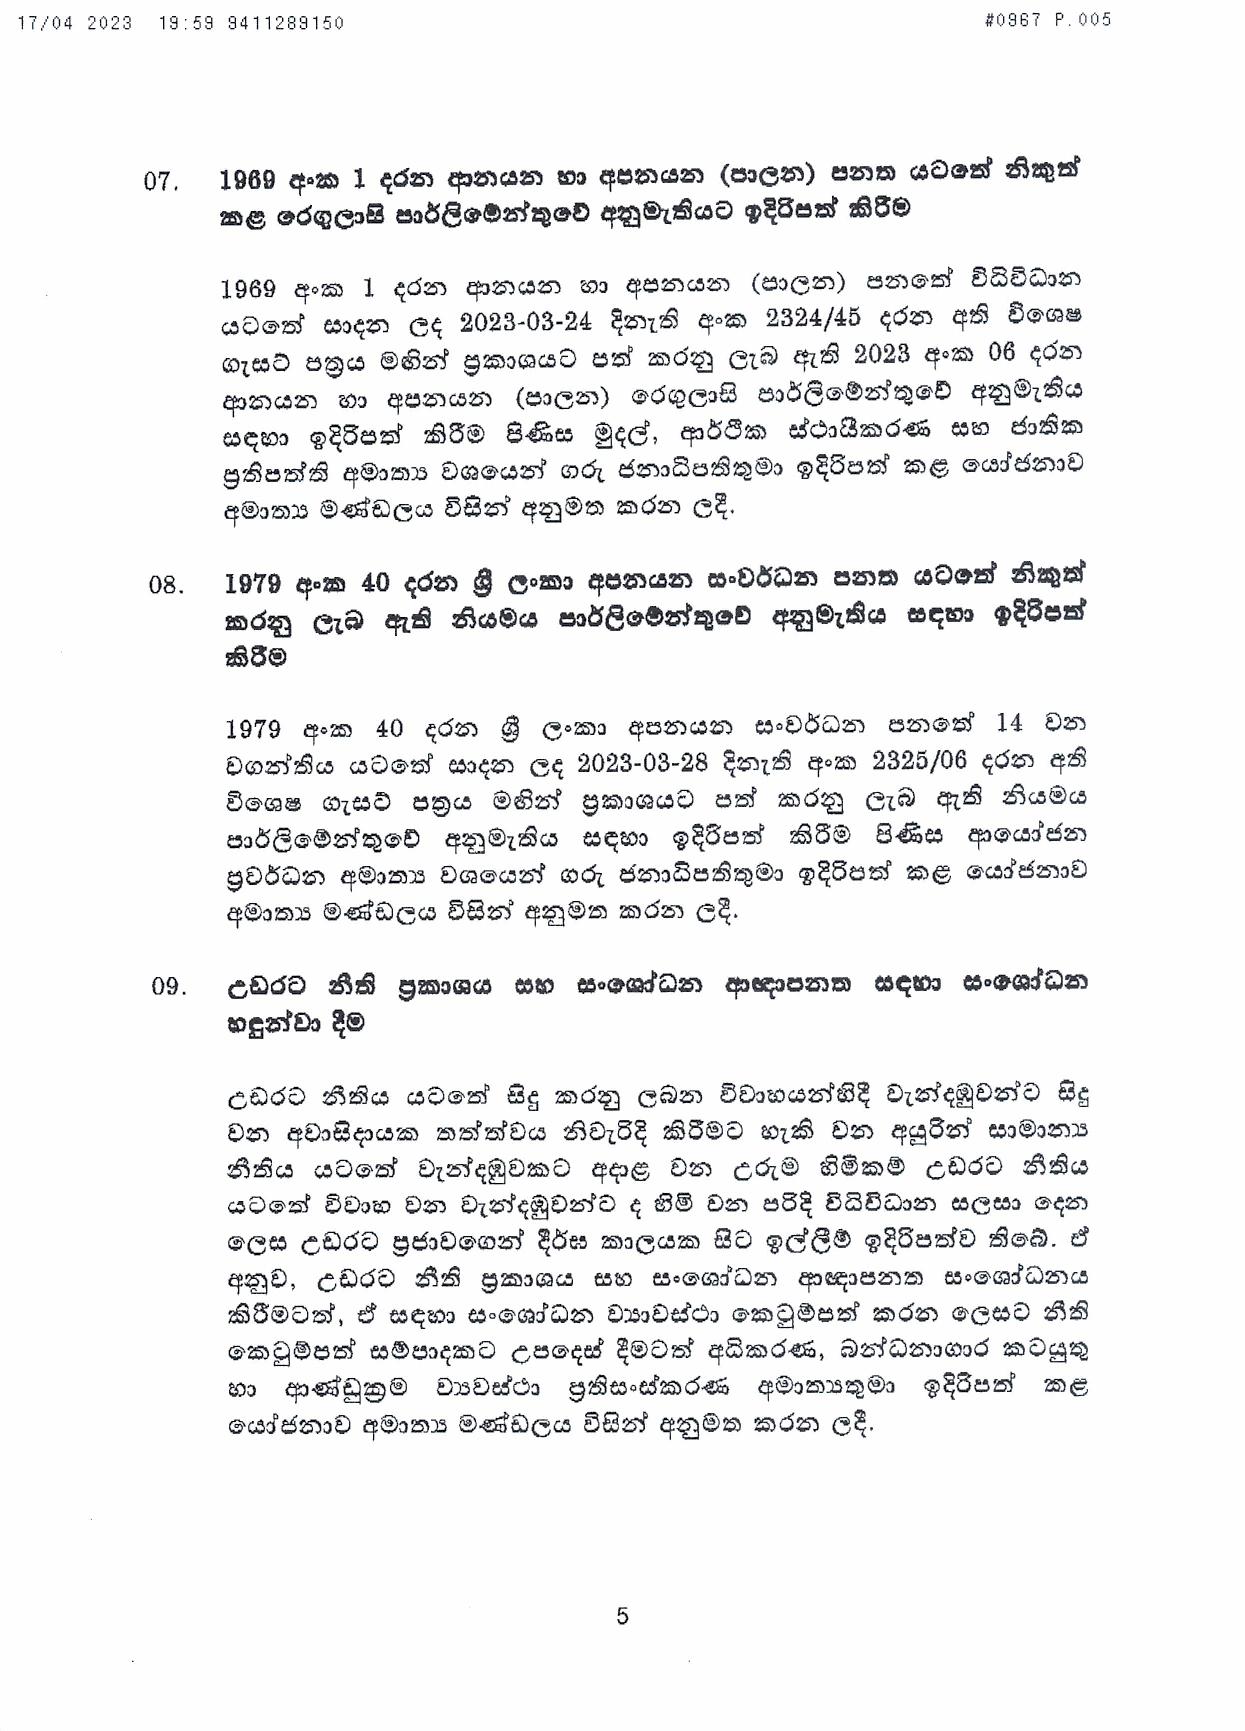 Cabinet Decisions on 17.04.2023 page 005